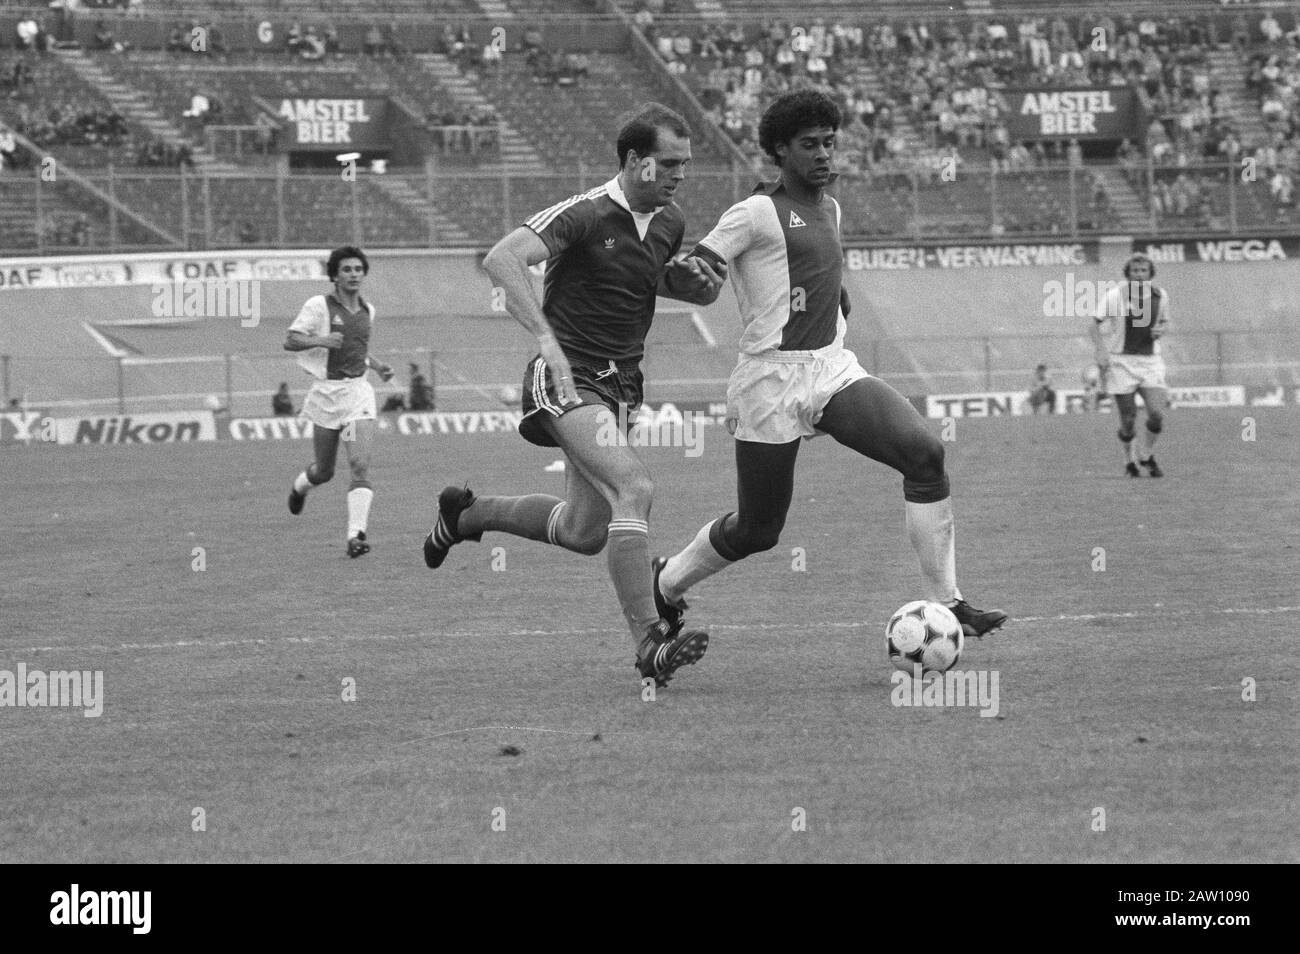 Amsterdam 706 tournament (football)  For the third and fourth place: Ajax - AZ 67. Rijkaard (right) vies with Metgod Date: August 9, 1981 Location: Amsterdam, Noord -Holland Keywords: soccer, sports Person Name: Metgod, John, Rijkaard, Frank Stock Photo